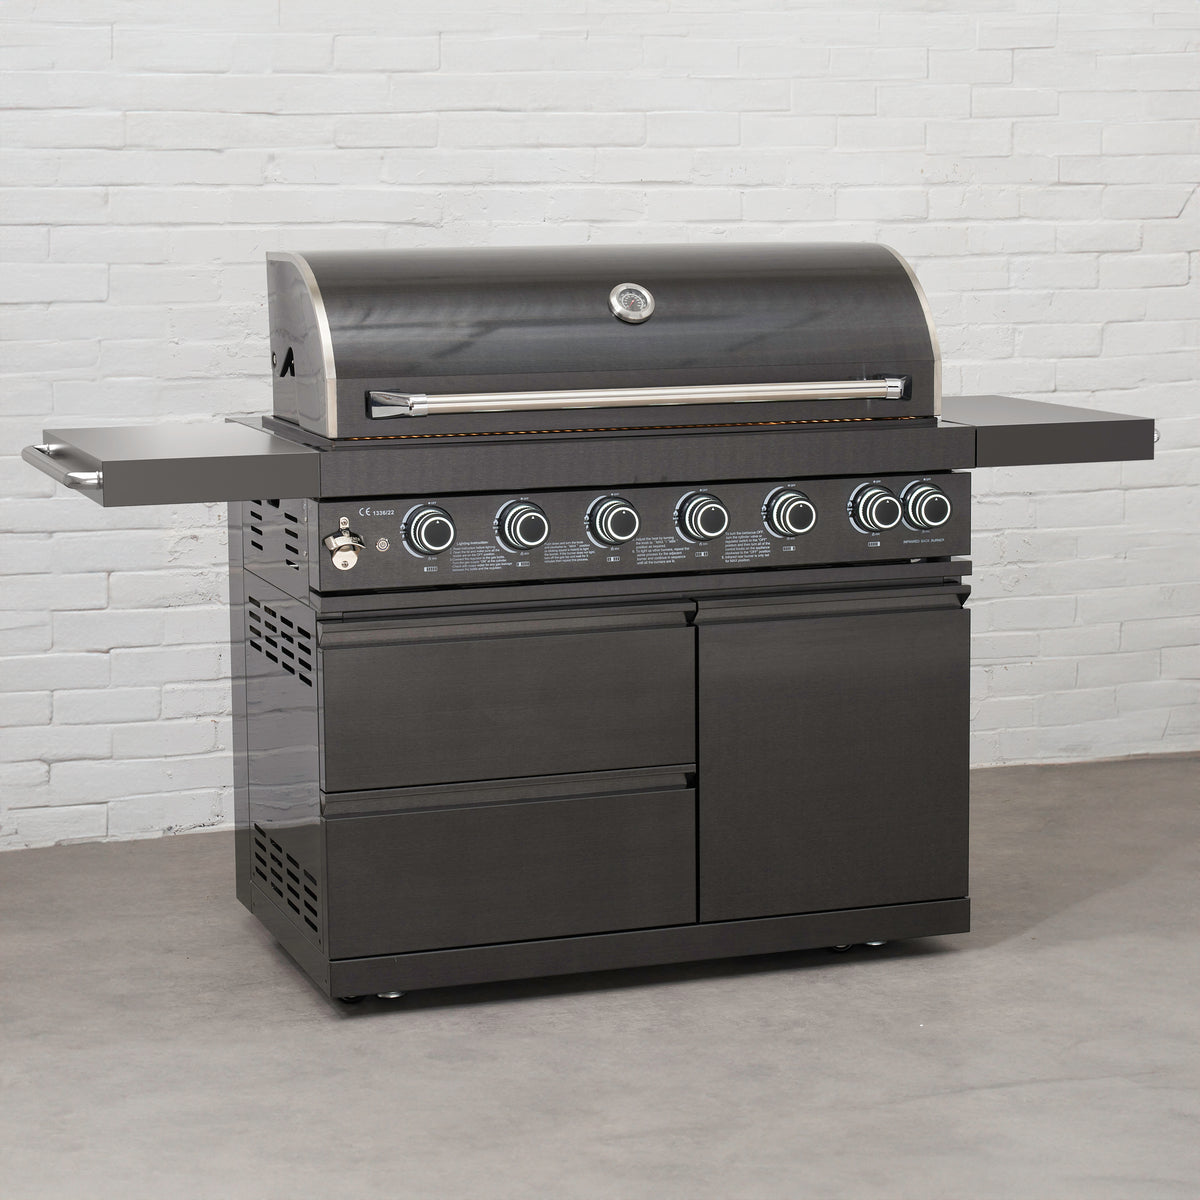 Draco Grills Outdoor Kitchen 6 Burner Black Stainless Steel Gas Barbecue